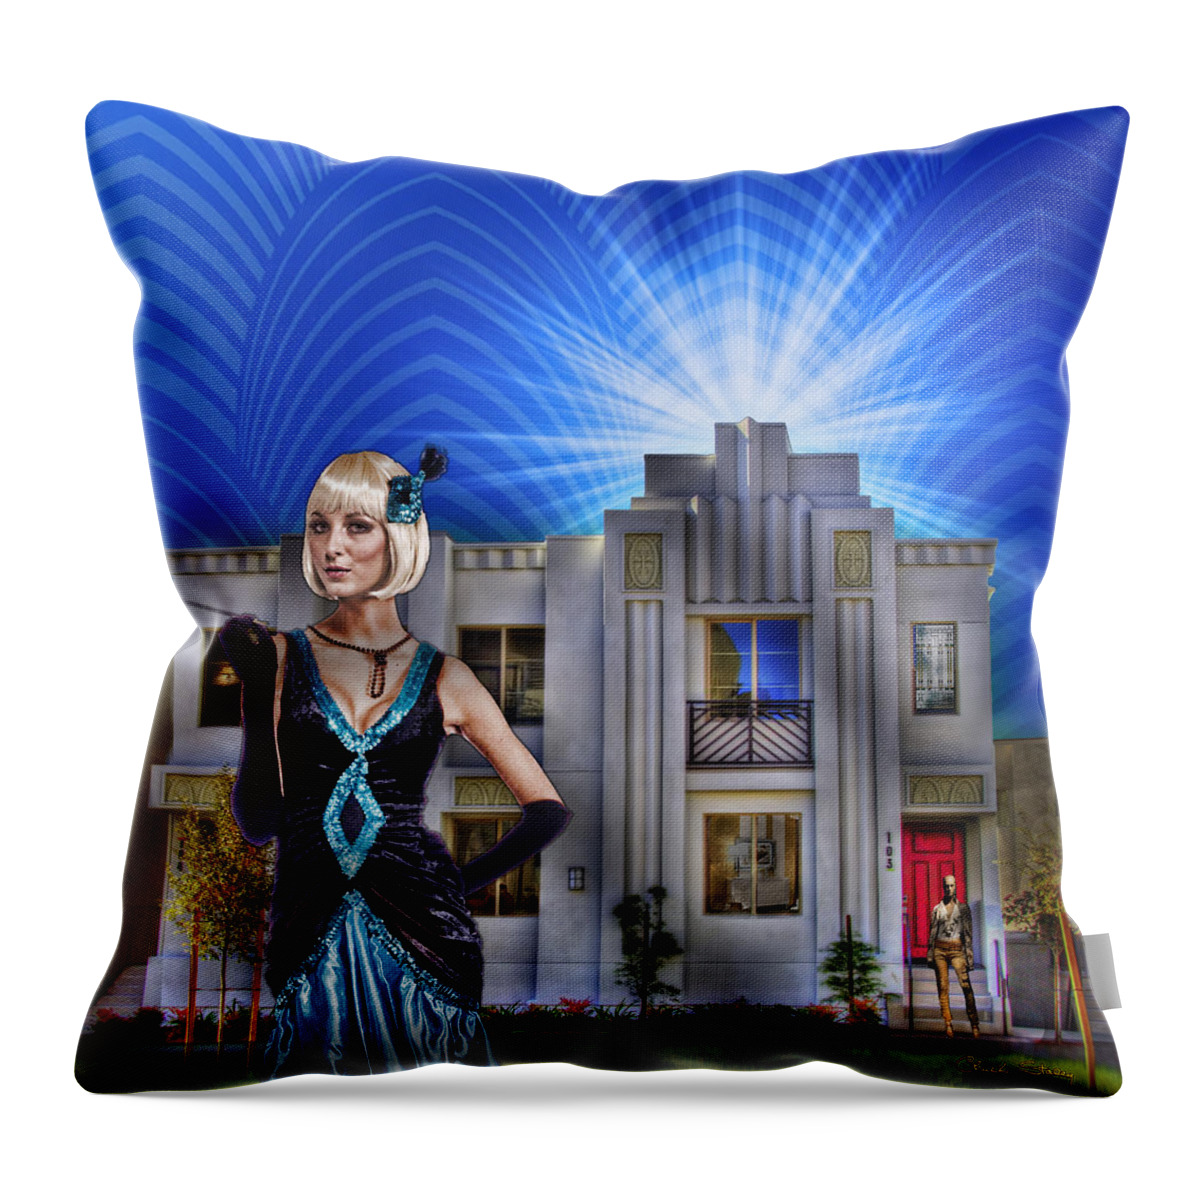 Roaring 20s Ball Throw Pillow featuring the photograph Roaring 20s Ball by Chuck Staley